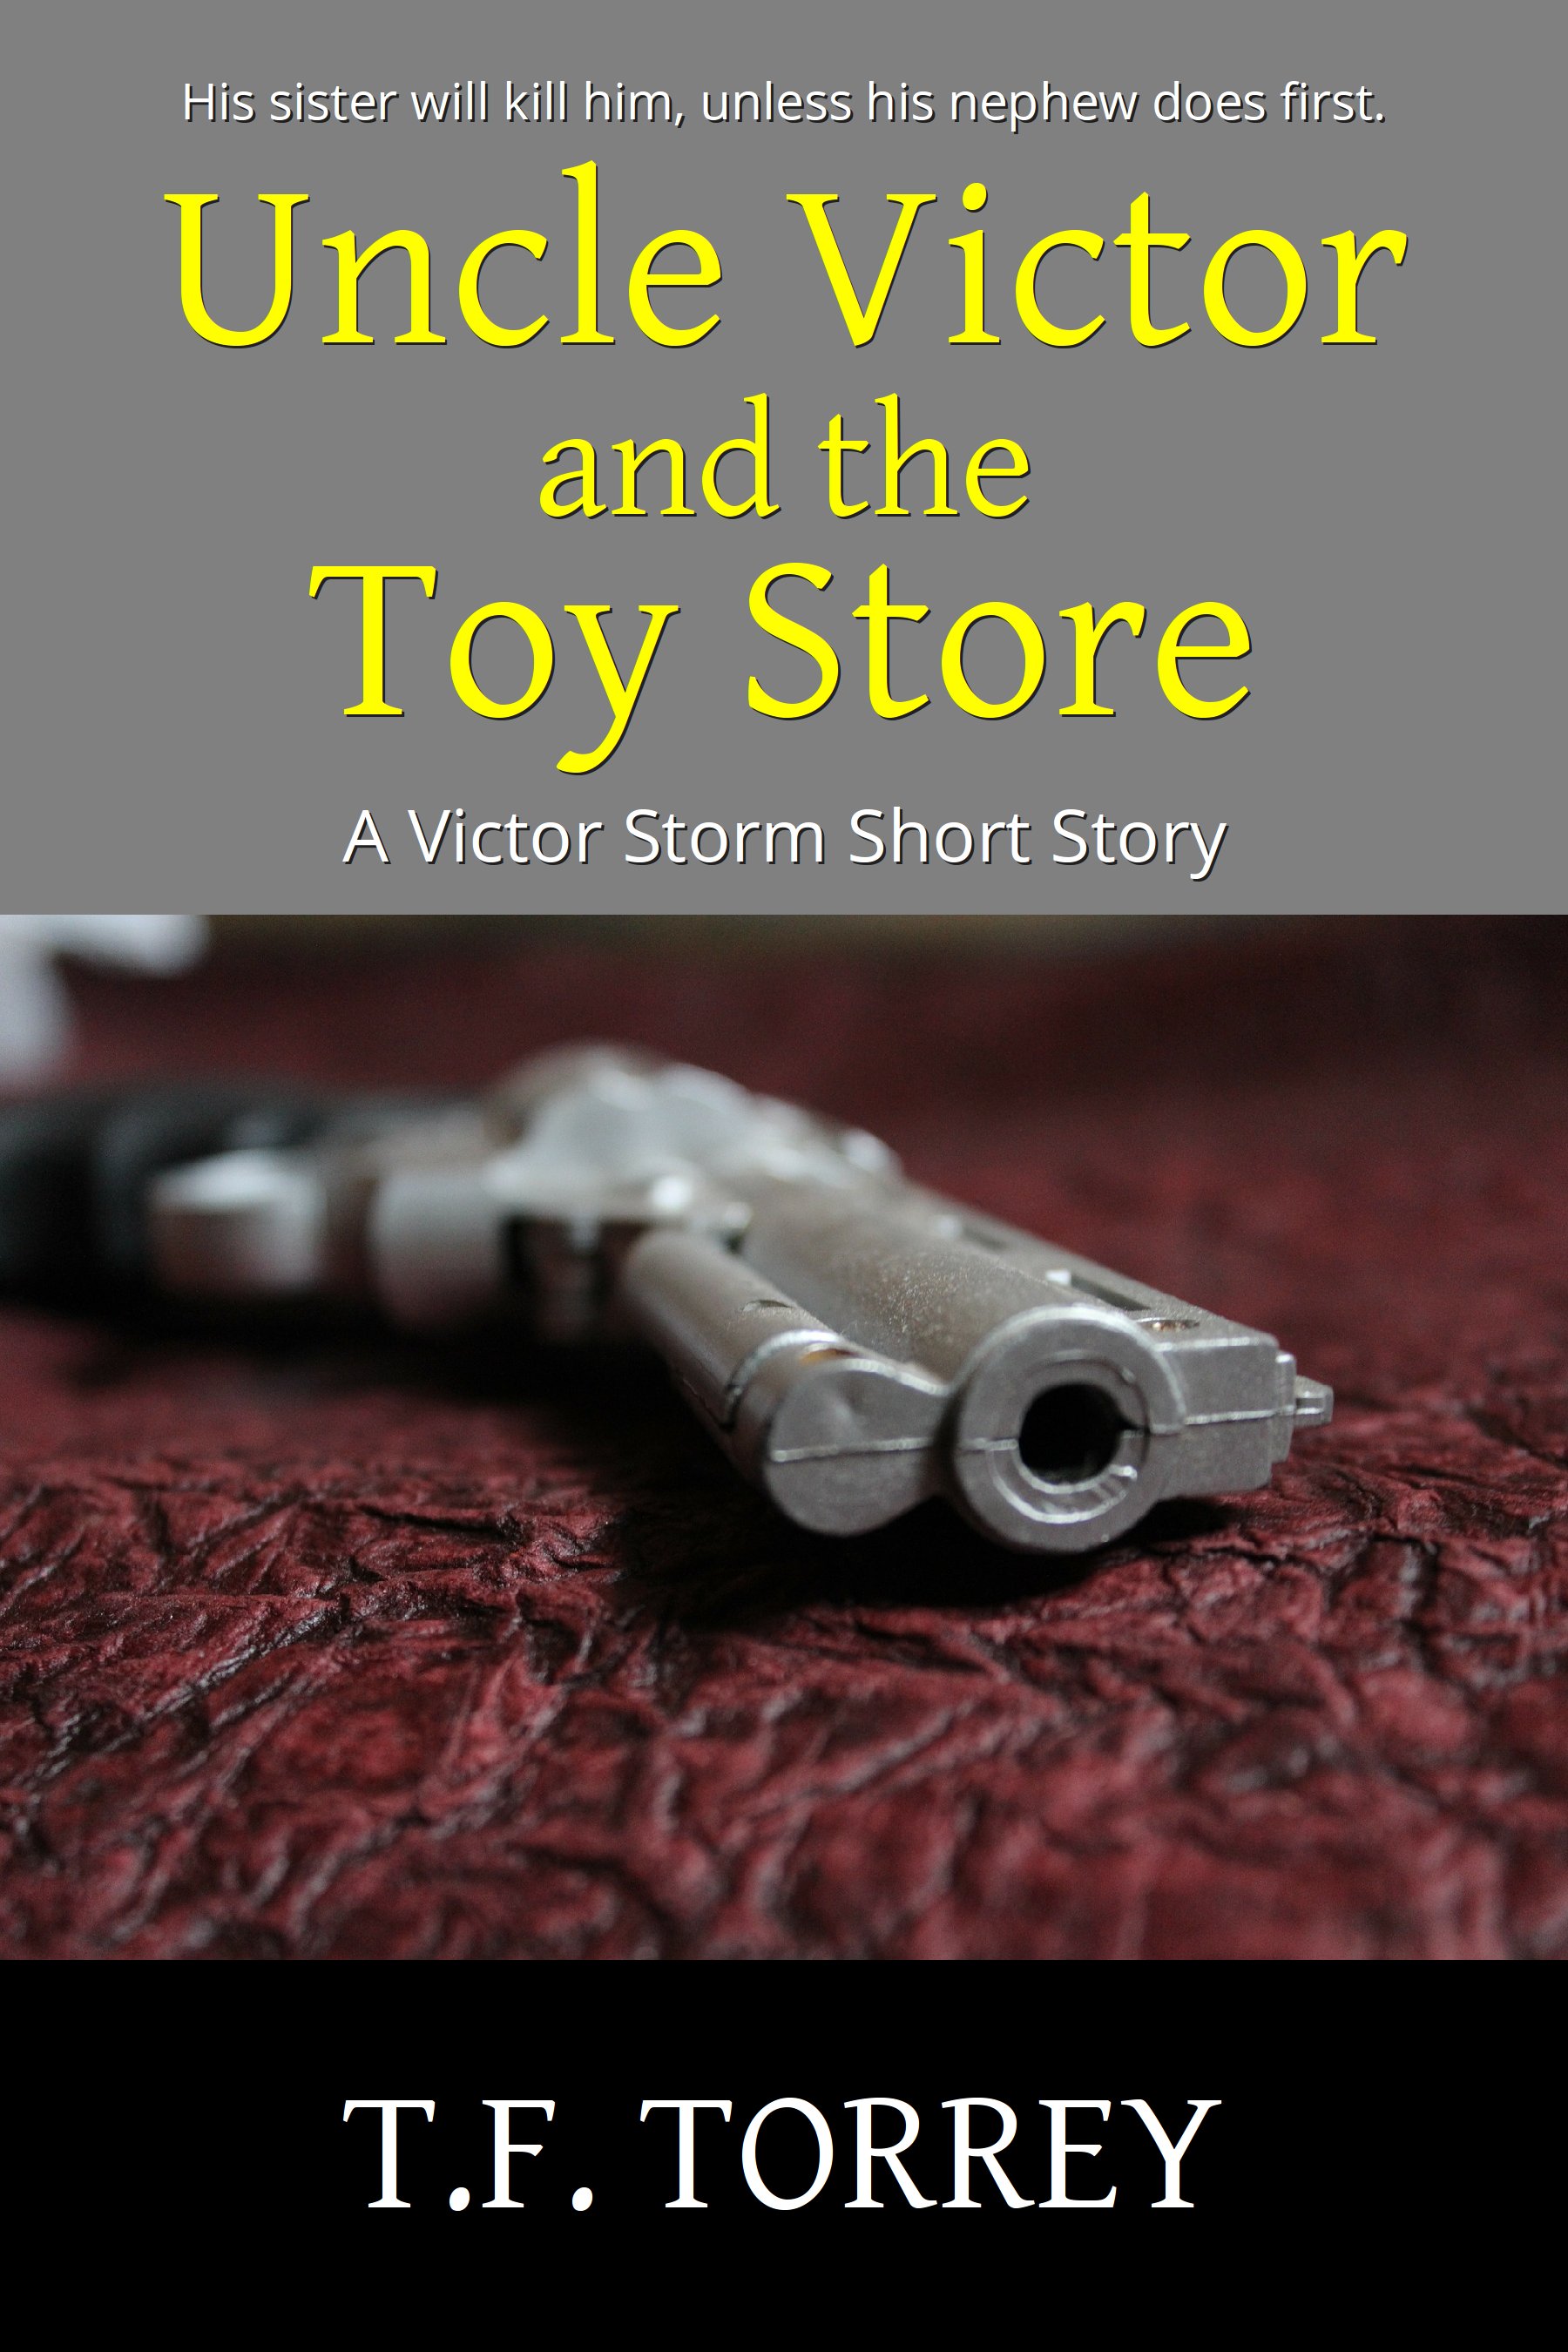 Cover of Uncle Victor and the Toy Store: A Victor Storm Short Story by T.F. Torrey